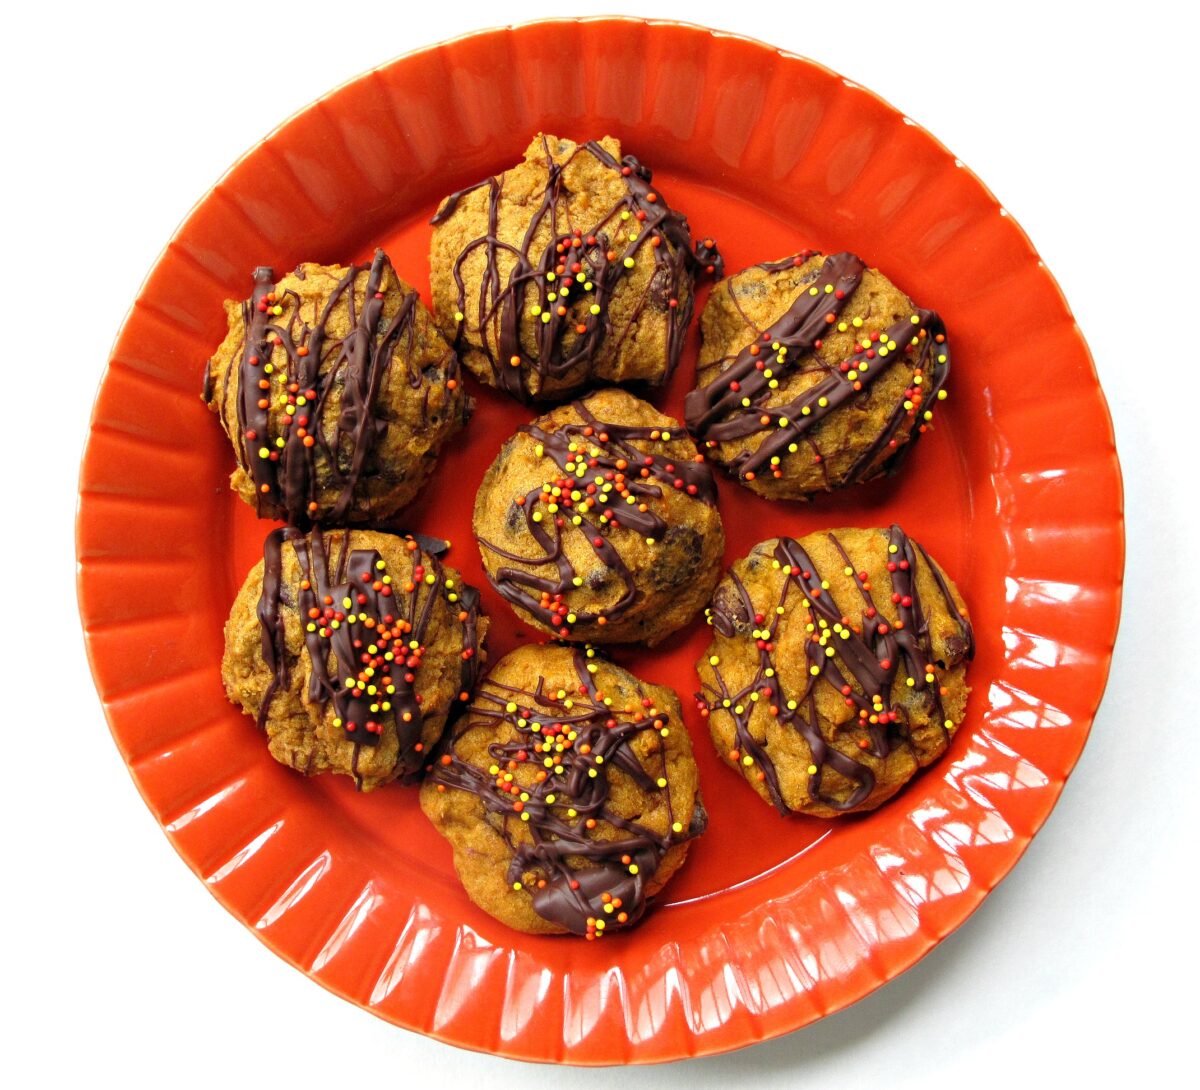 Chocolate drizzled on an orange plate.